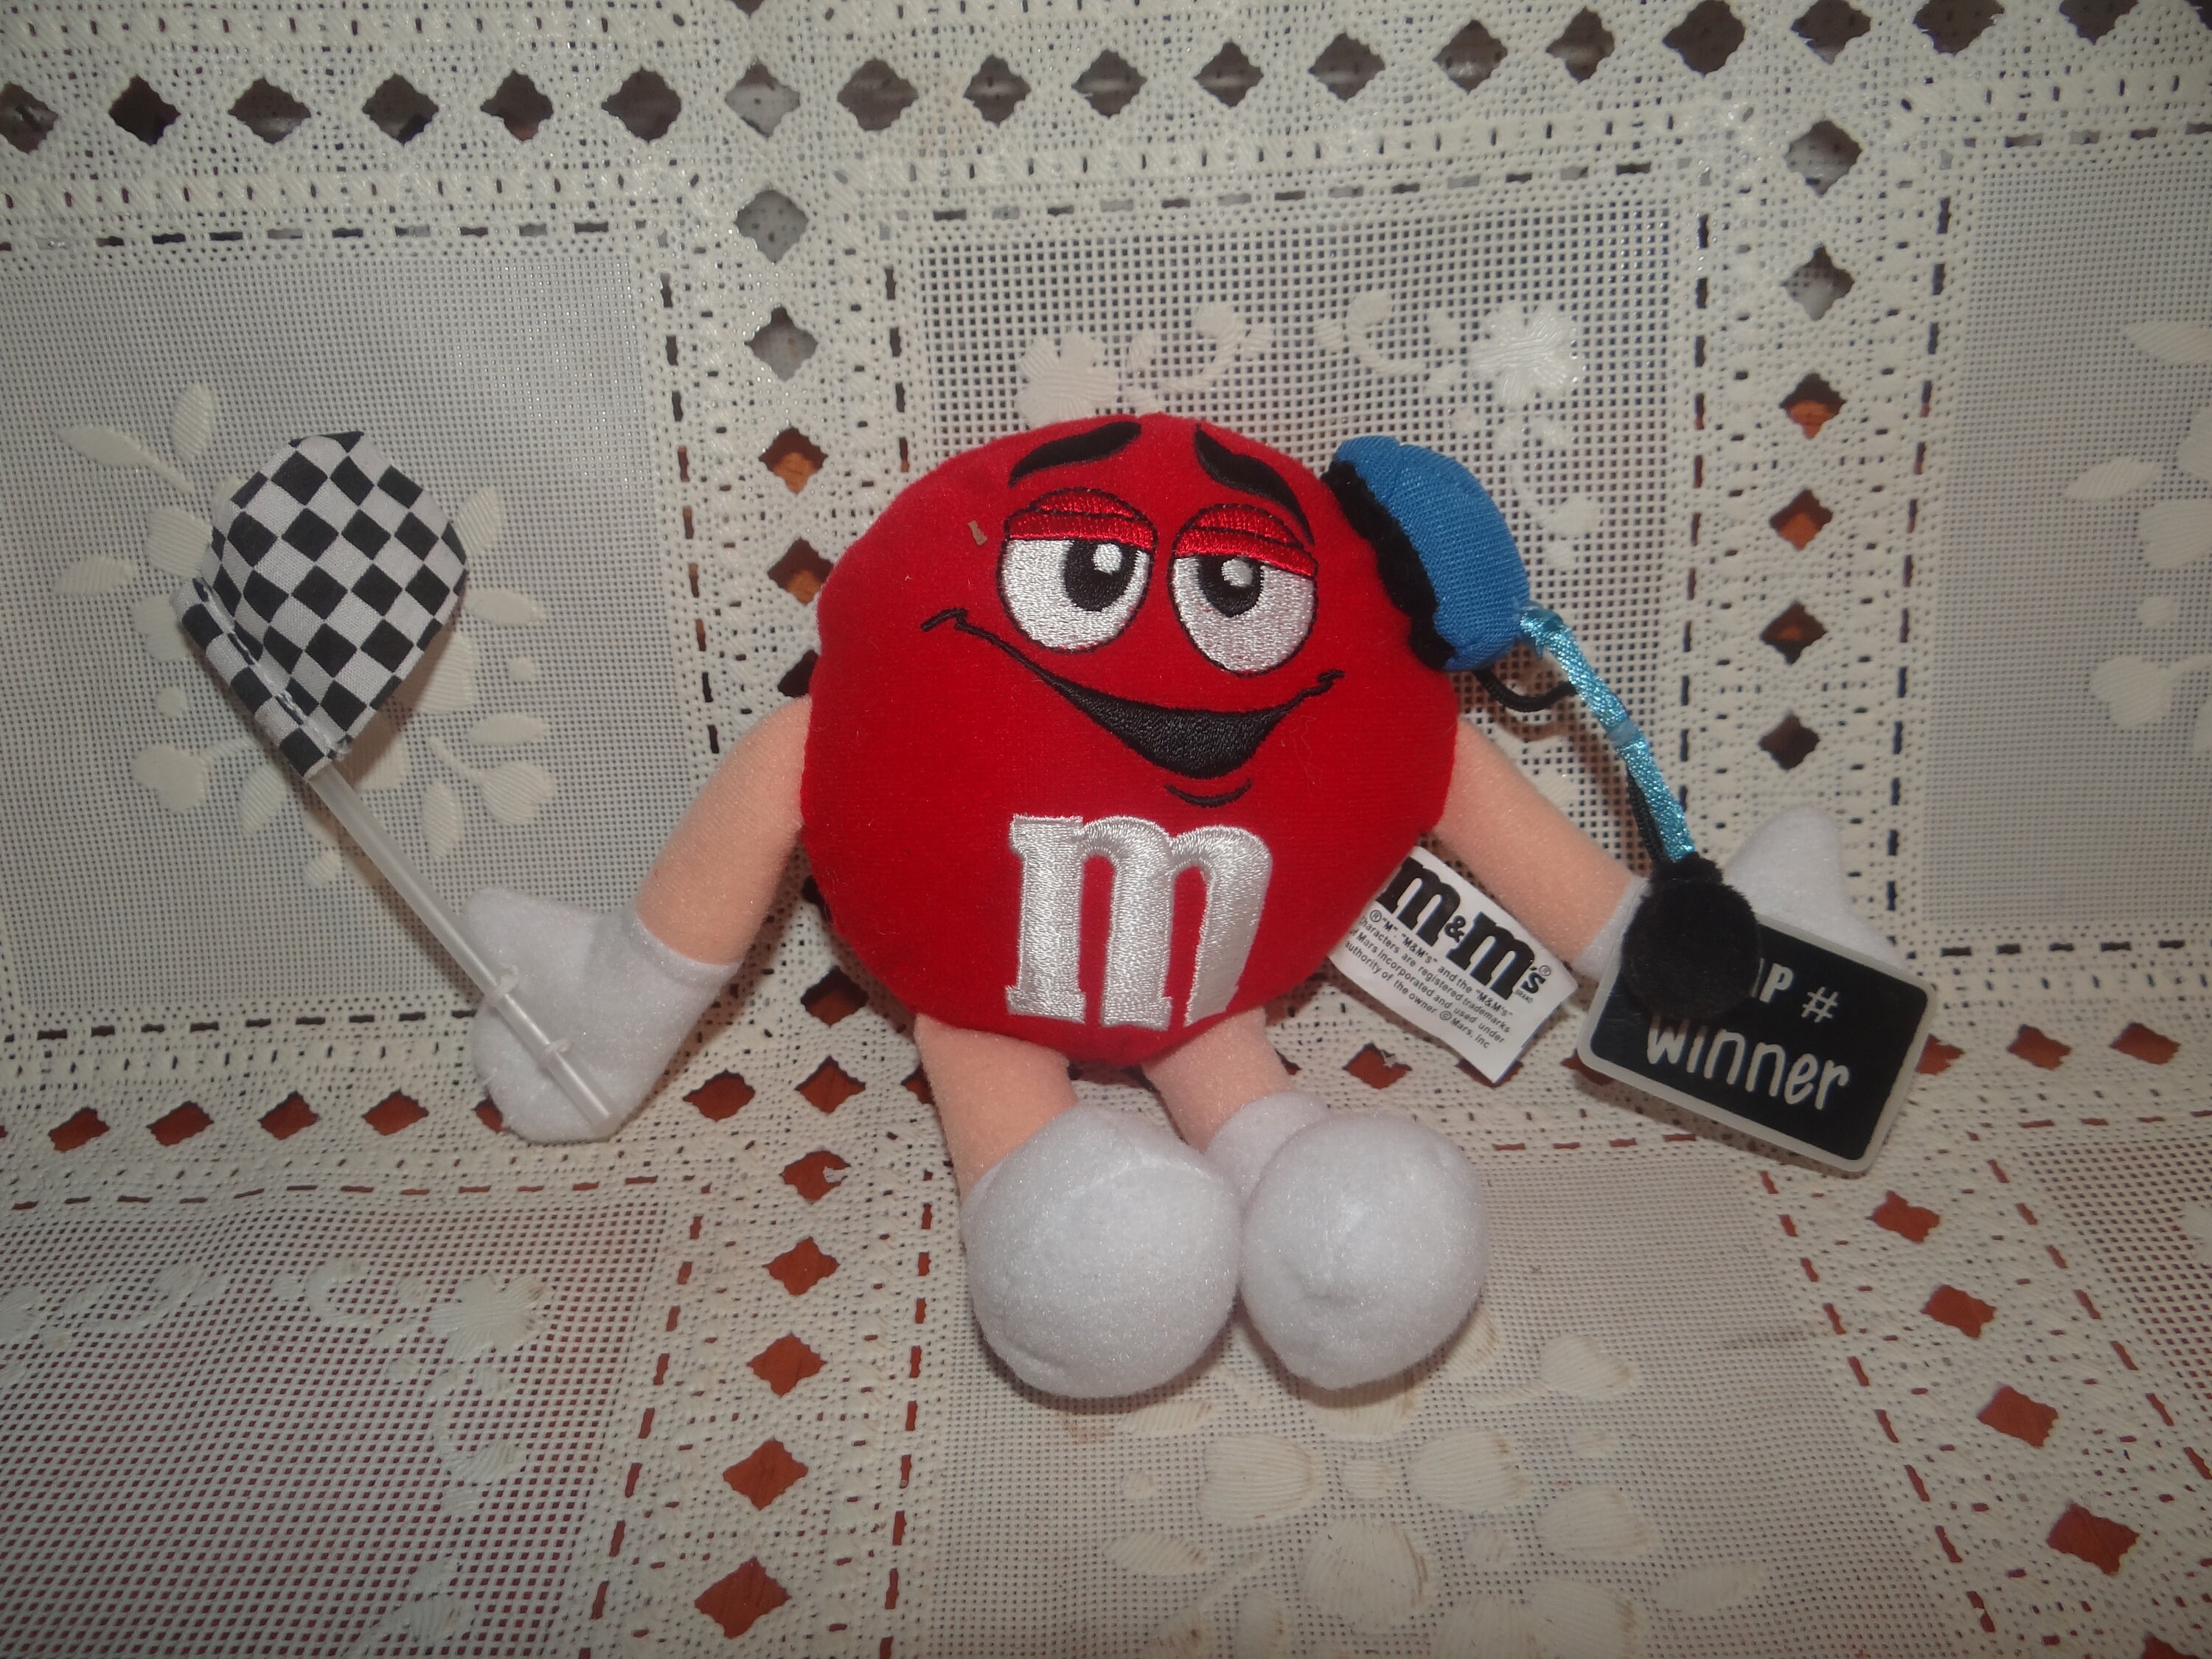 M&M M&M's Candy Red Silly Character Face Red Thumbs Up Adult Men T-Shirt  (Size XXL XX-Large, Red Thumbs Up)